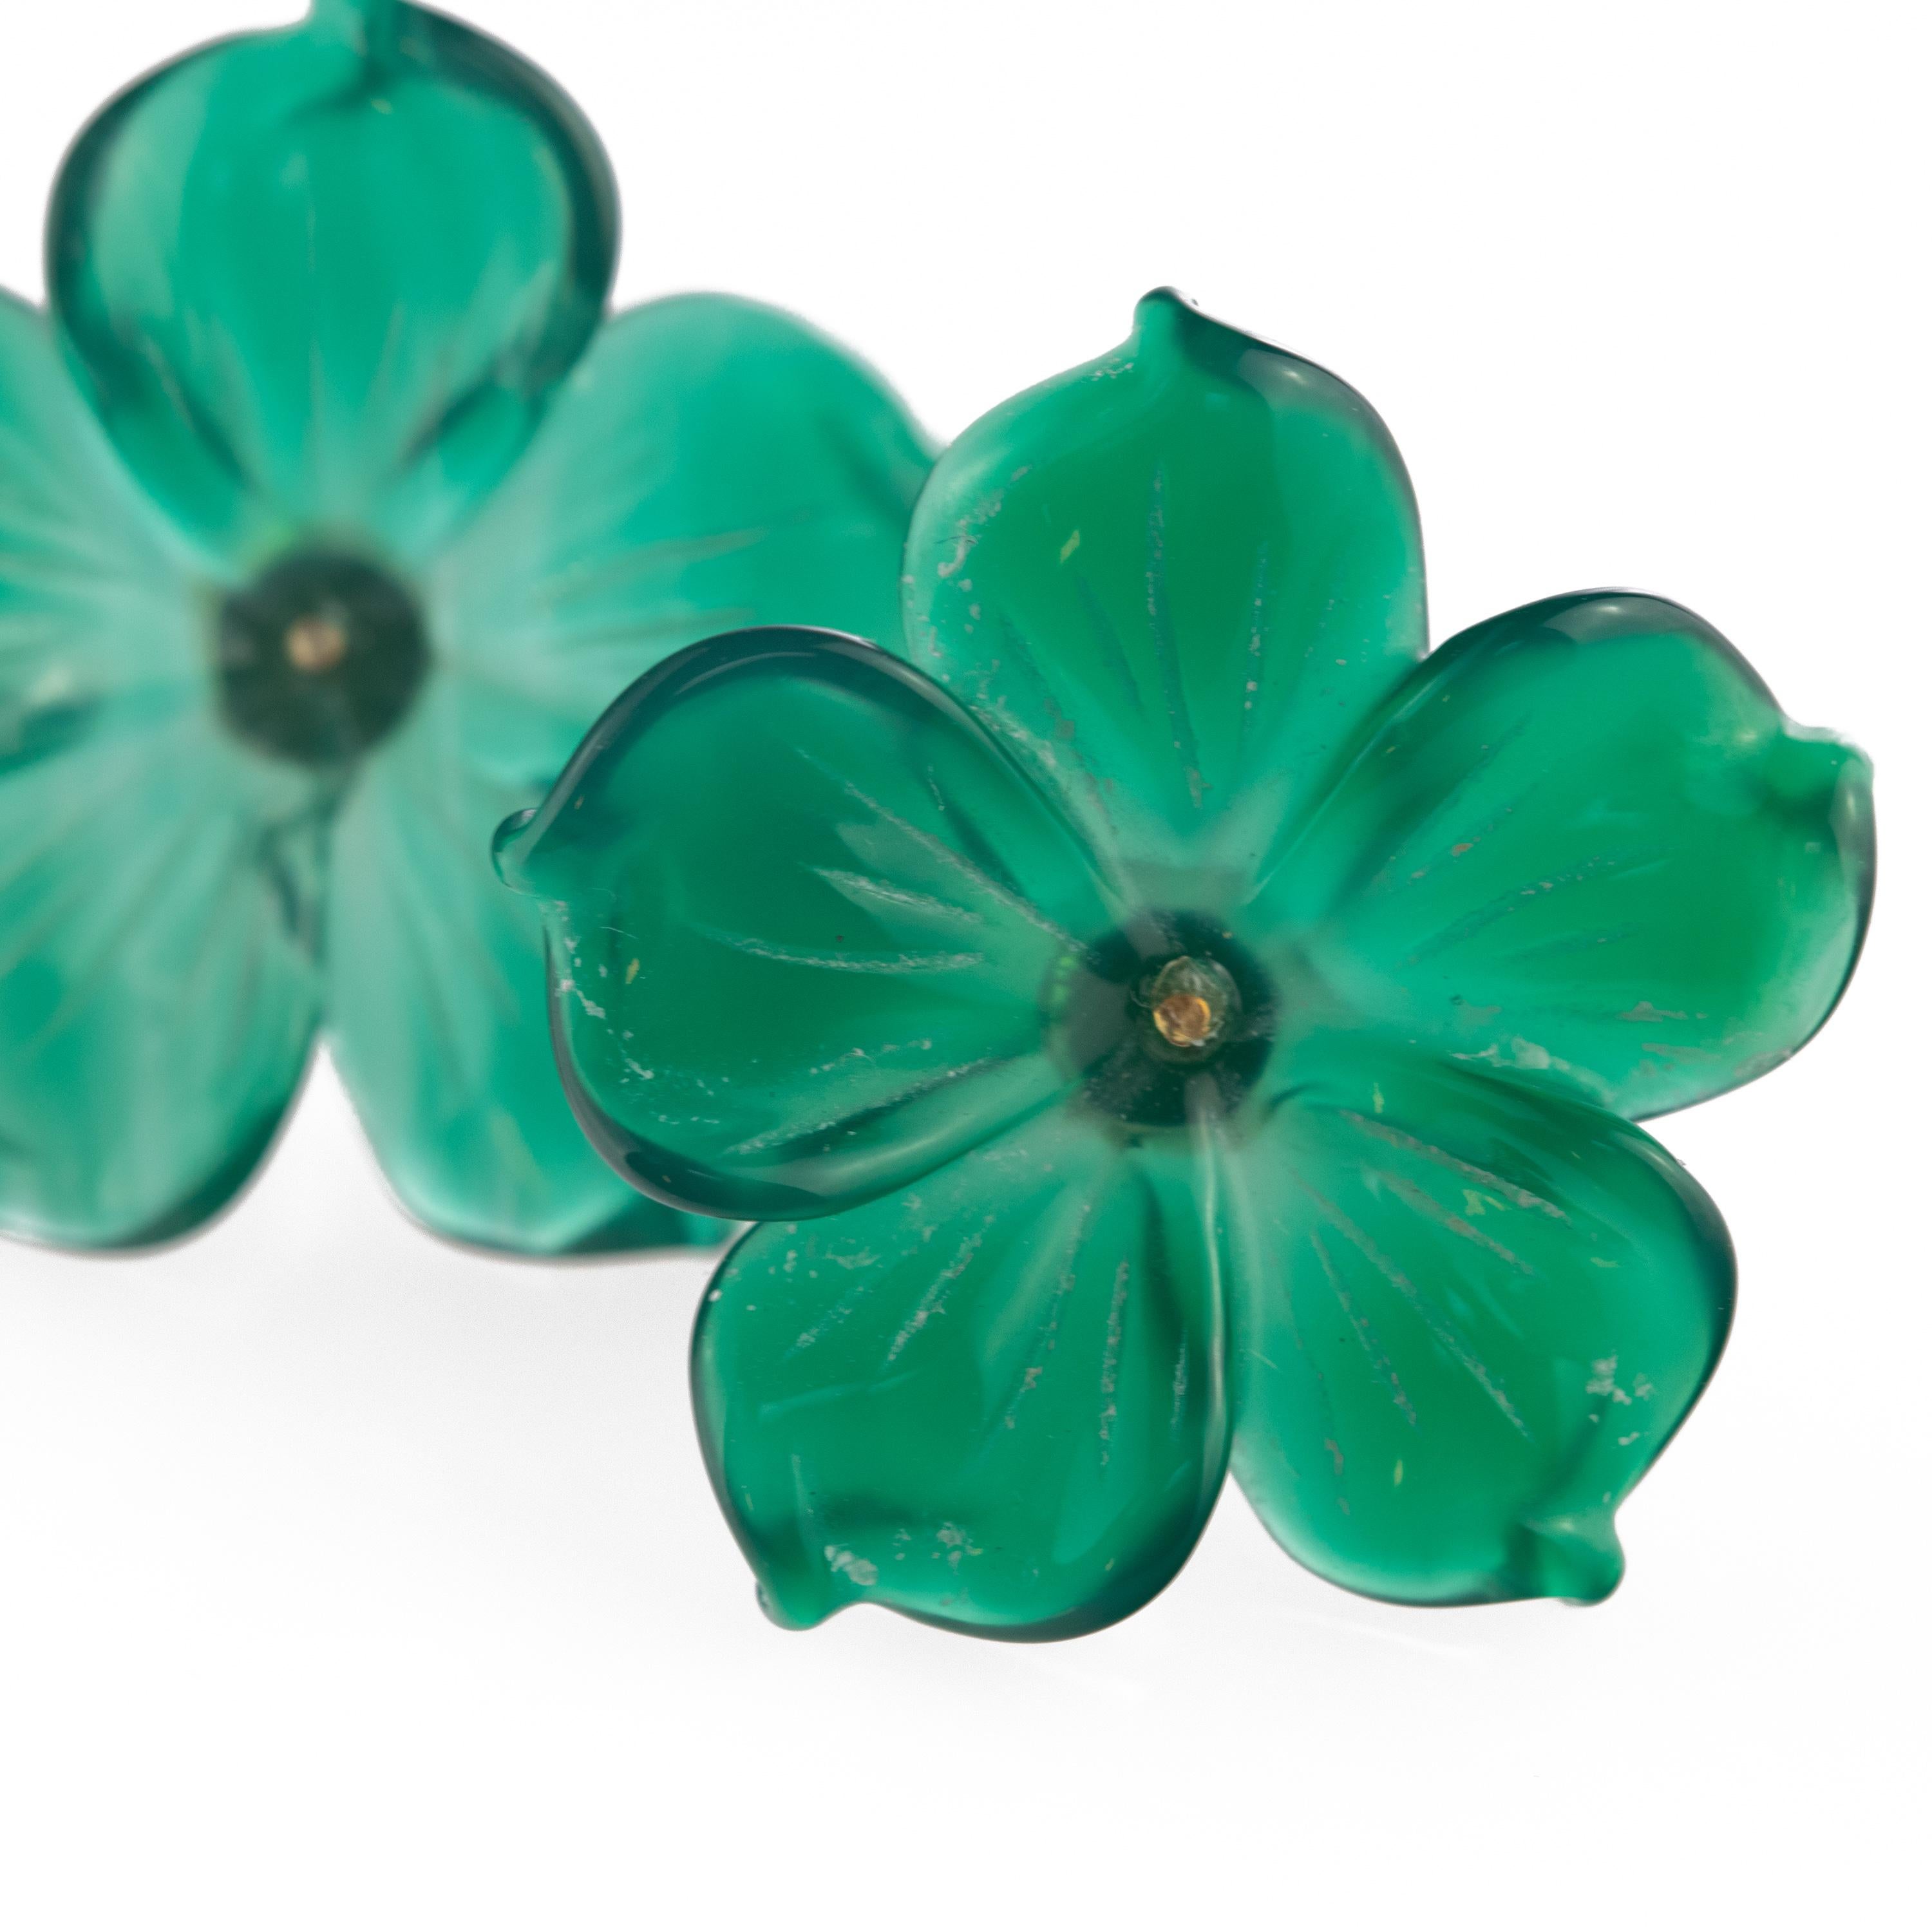 Astonishing and gorgeous green agate flower stud and chic earrings. Made for a beautiful girl or woman these natural carved petals evoke the italian handmade traditional jewelry work.

This delicate design shows the sweetness and innocence of the